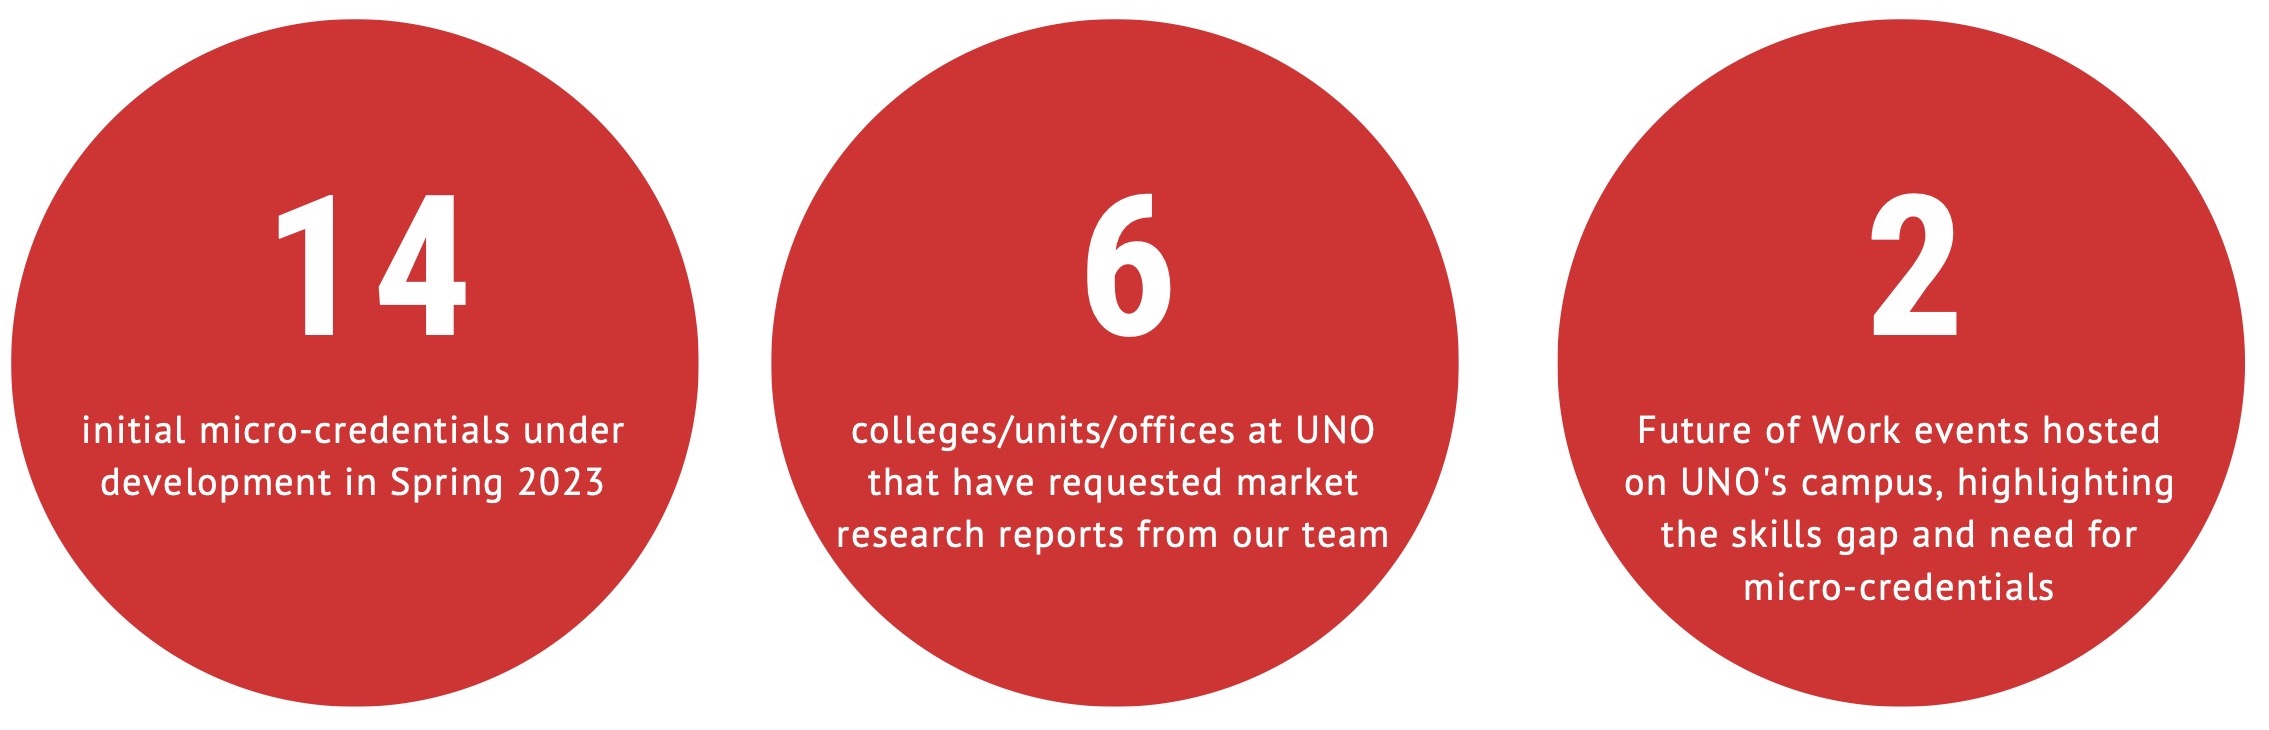 14 mcs developed, 6 colleges/units/offices at UNO who have requested market research reports, 2 future of work events hosted